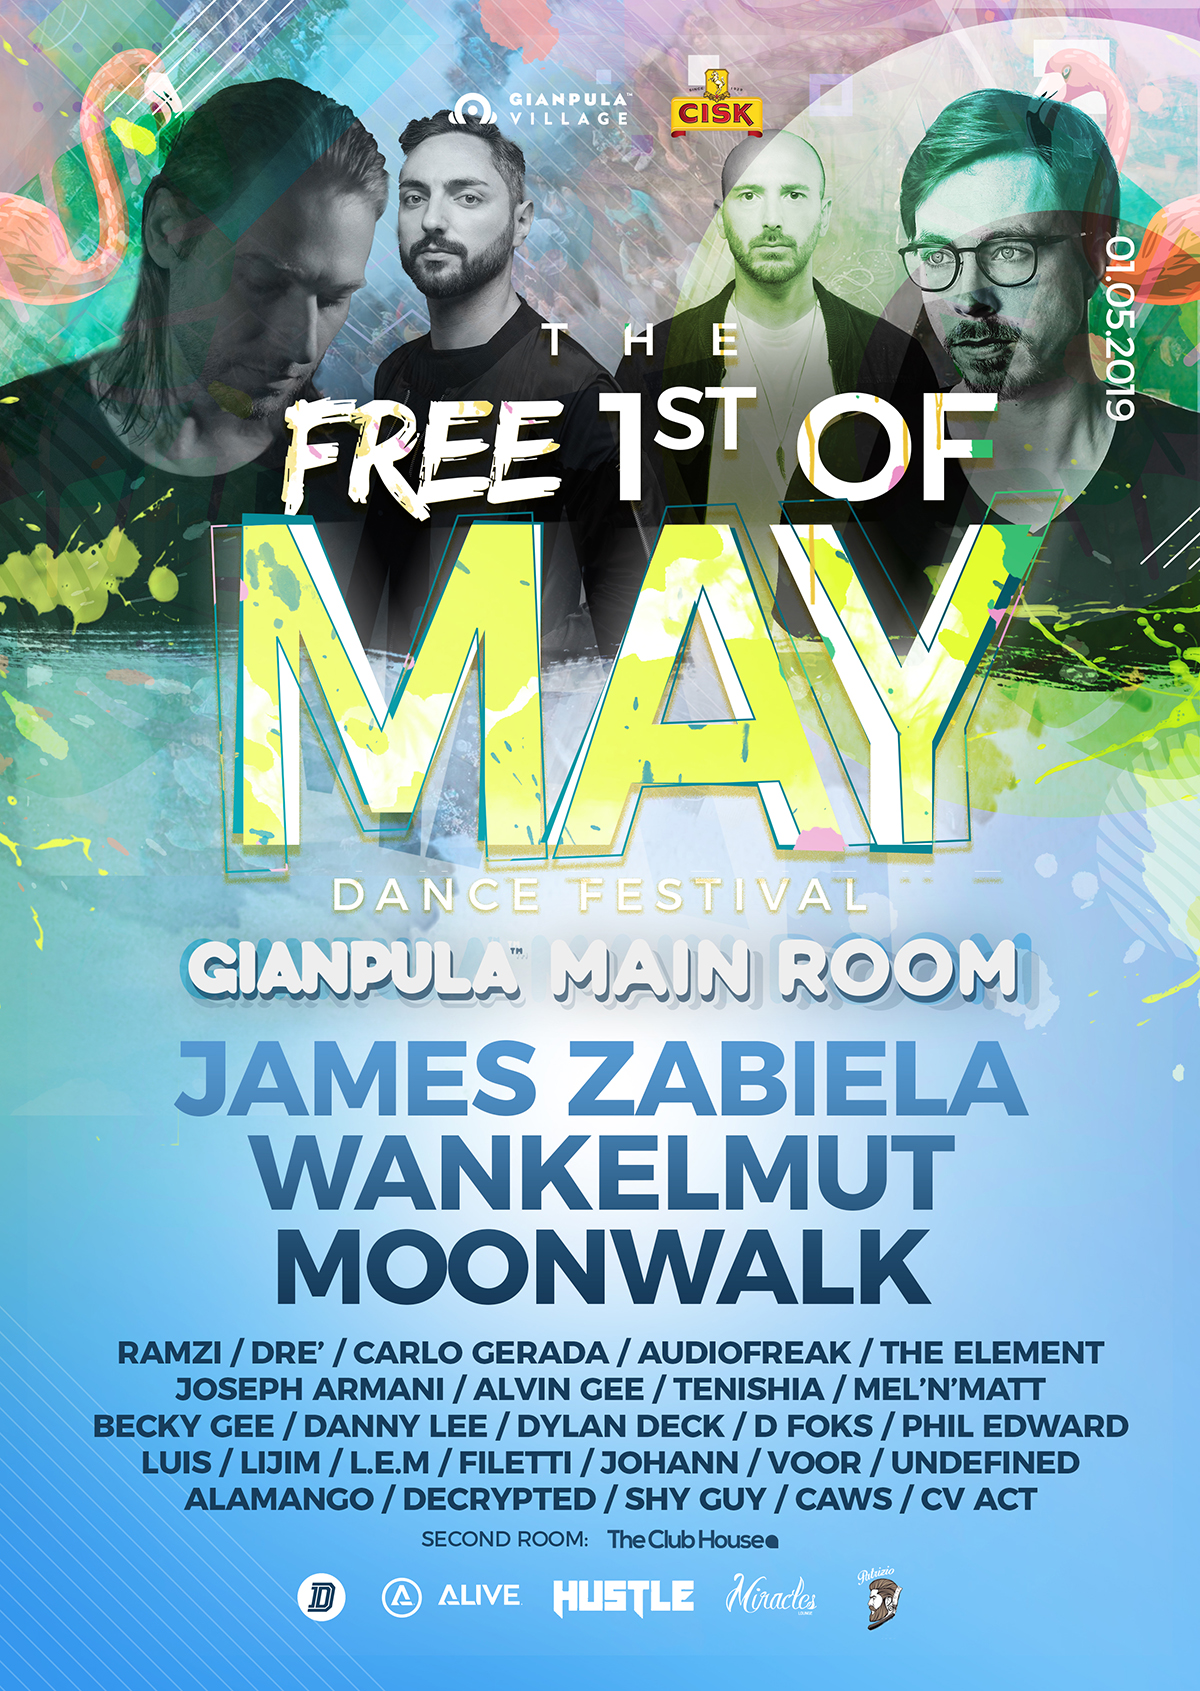 The Free 1st of May Dance Music Festival 2019 poster